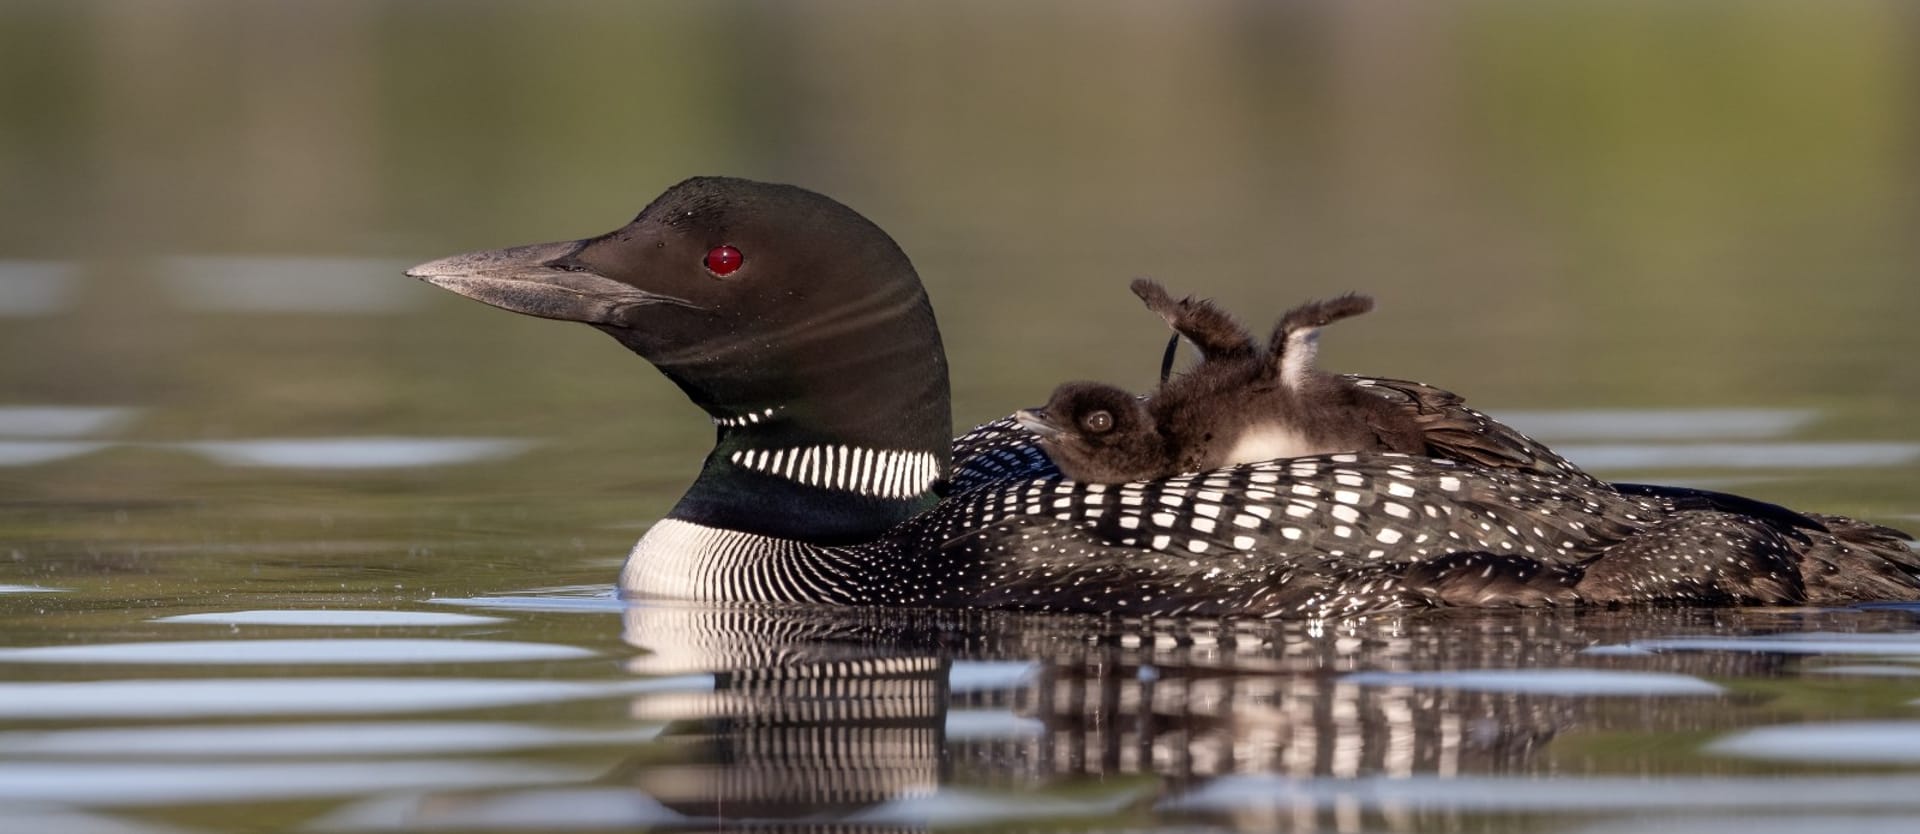 a-common-loon-and-chick-on-a-lake-NFFFHN5 (1)